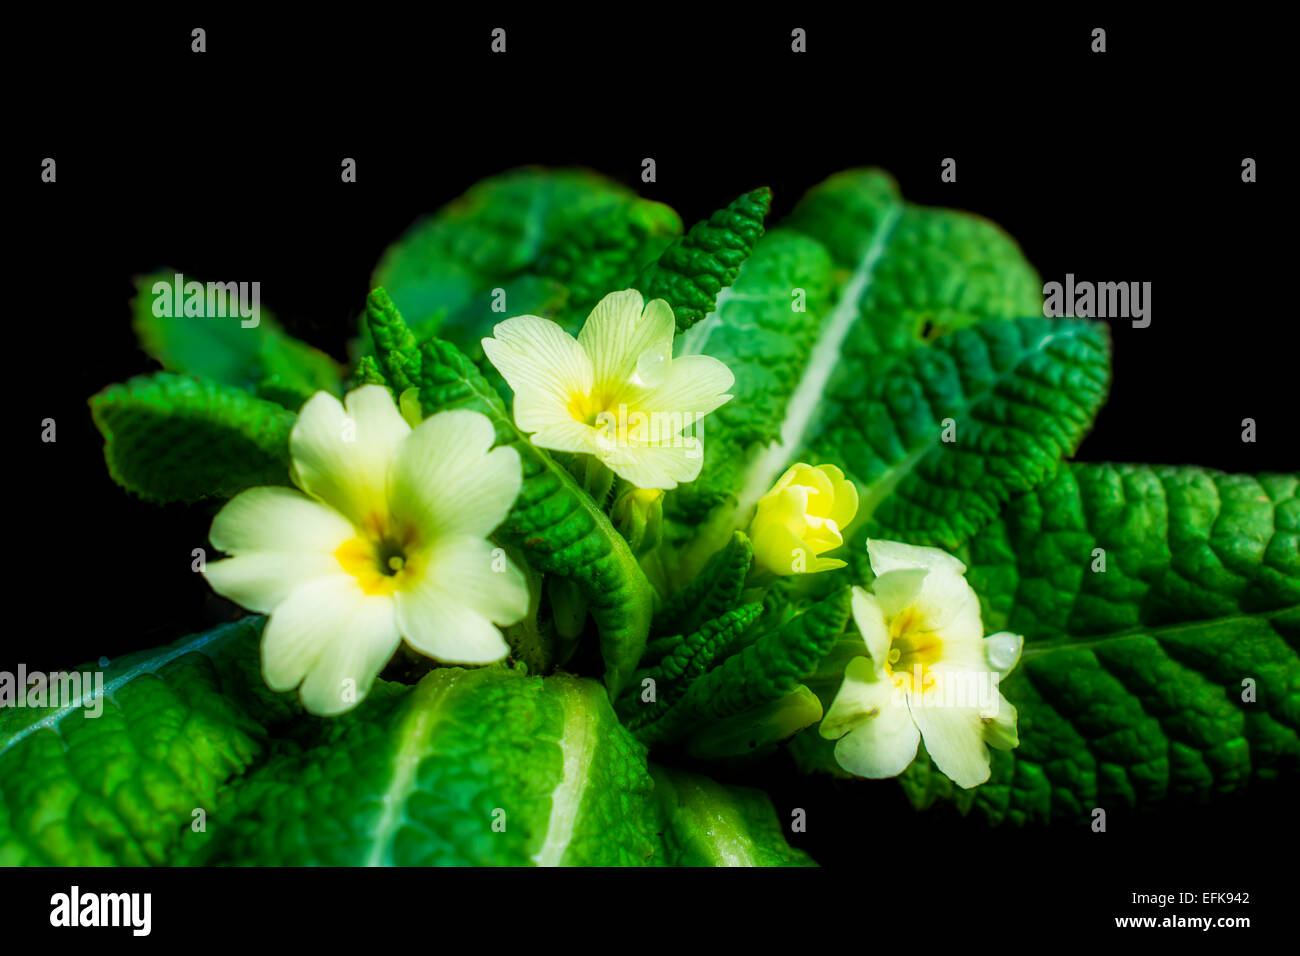 Primrose - Primula vulgaris, messenger of spring. The primrose is one of the earliest spring flowers. Artistic intent soft focus Stock Photo